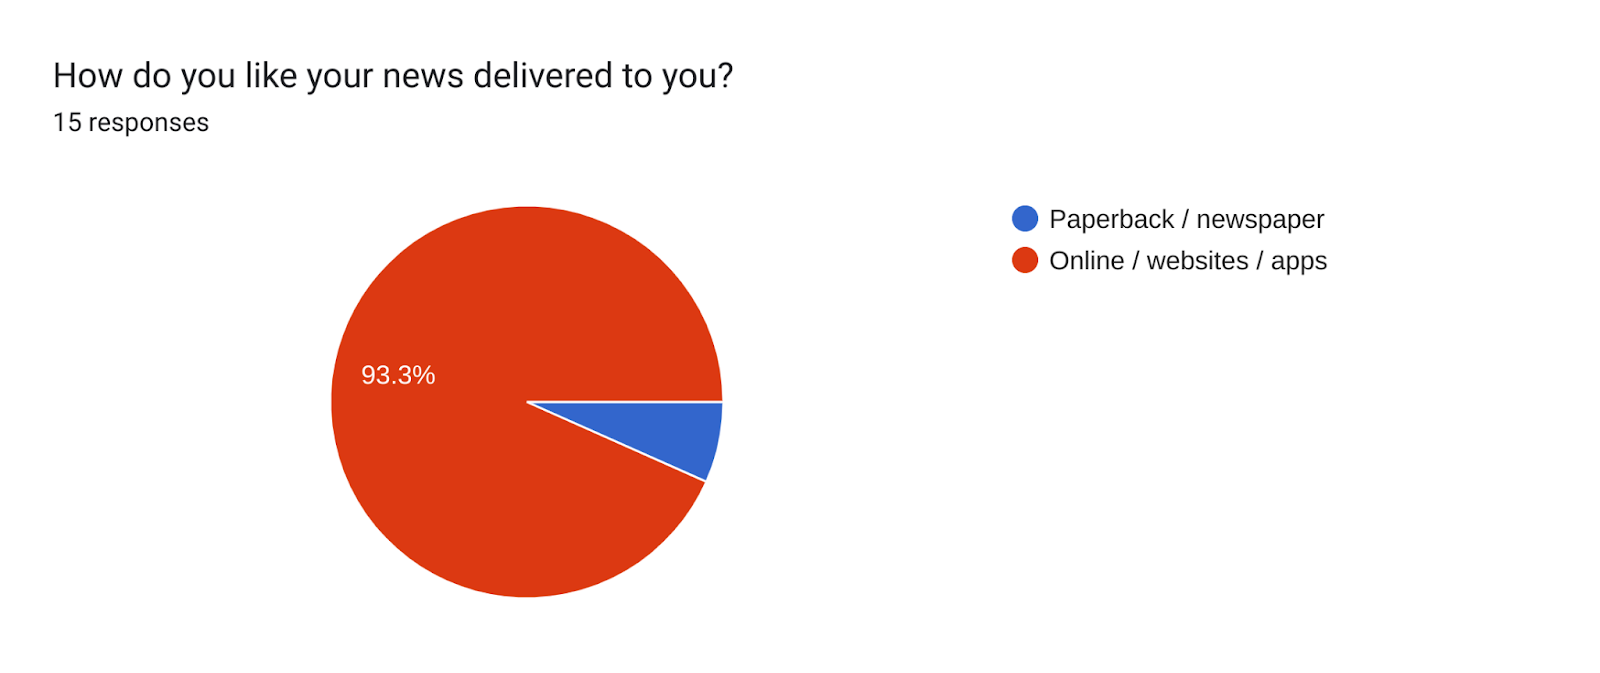 Forms response chart. Question title: How do you like your news delivered to you?
. Number of responses: 15 responses.